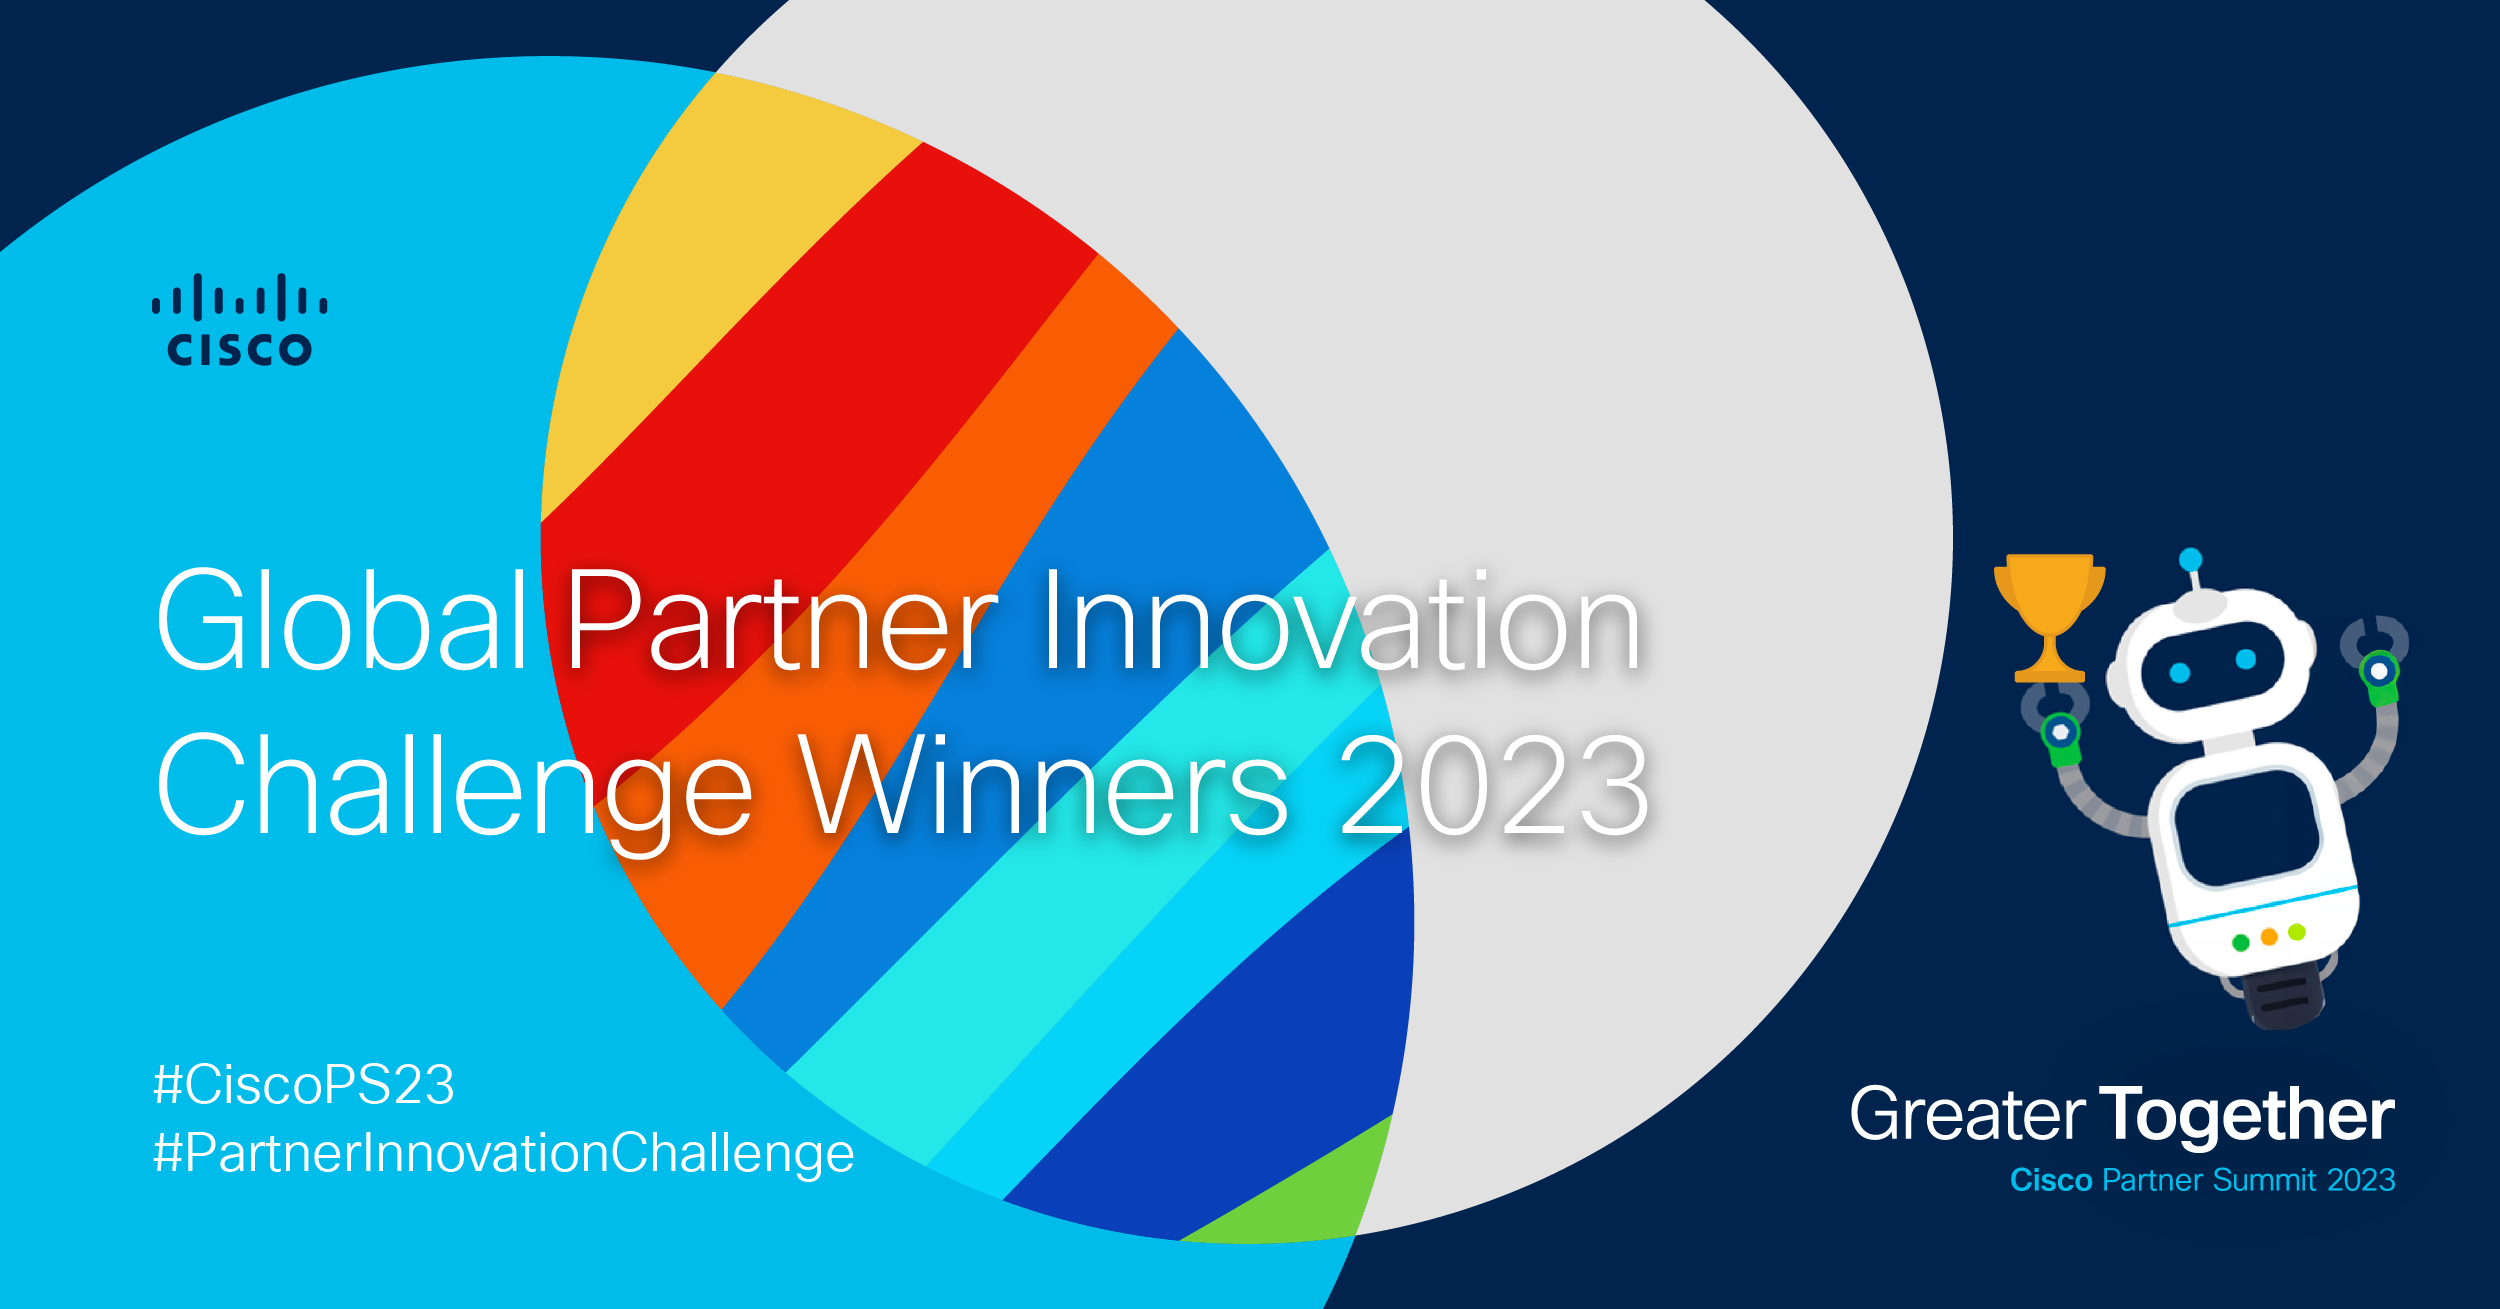 6th Annual Partner Innovation Challenge: Remarkable Growth, Outstanding Winners